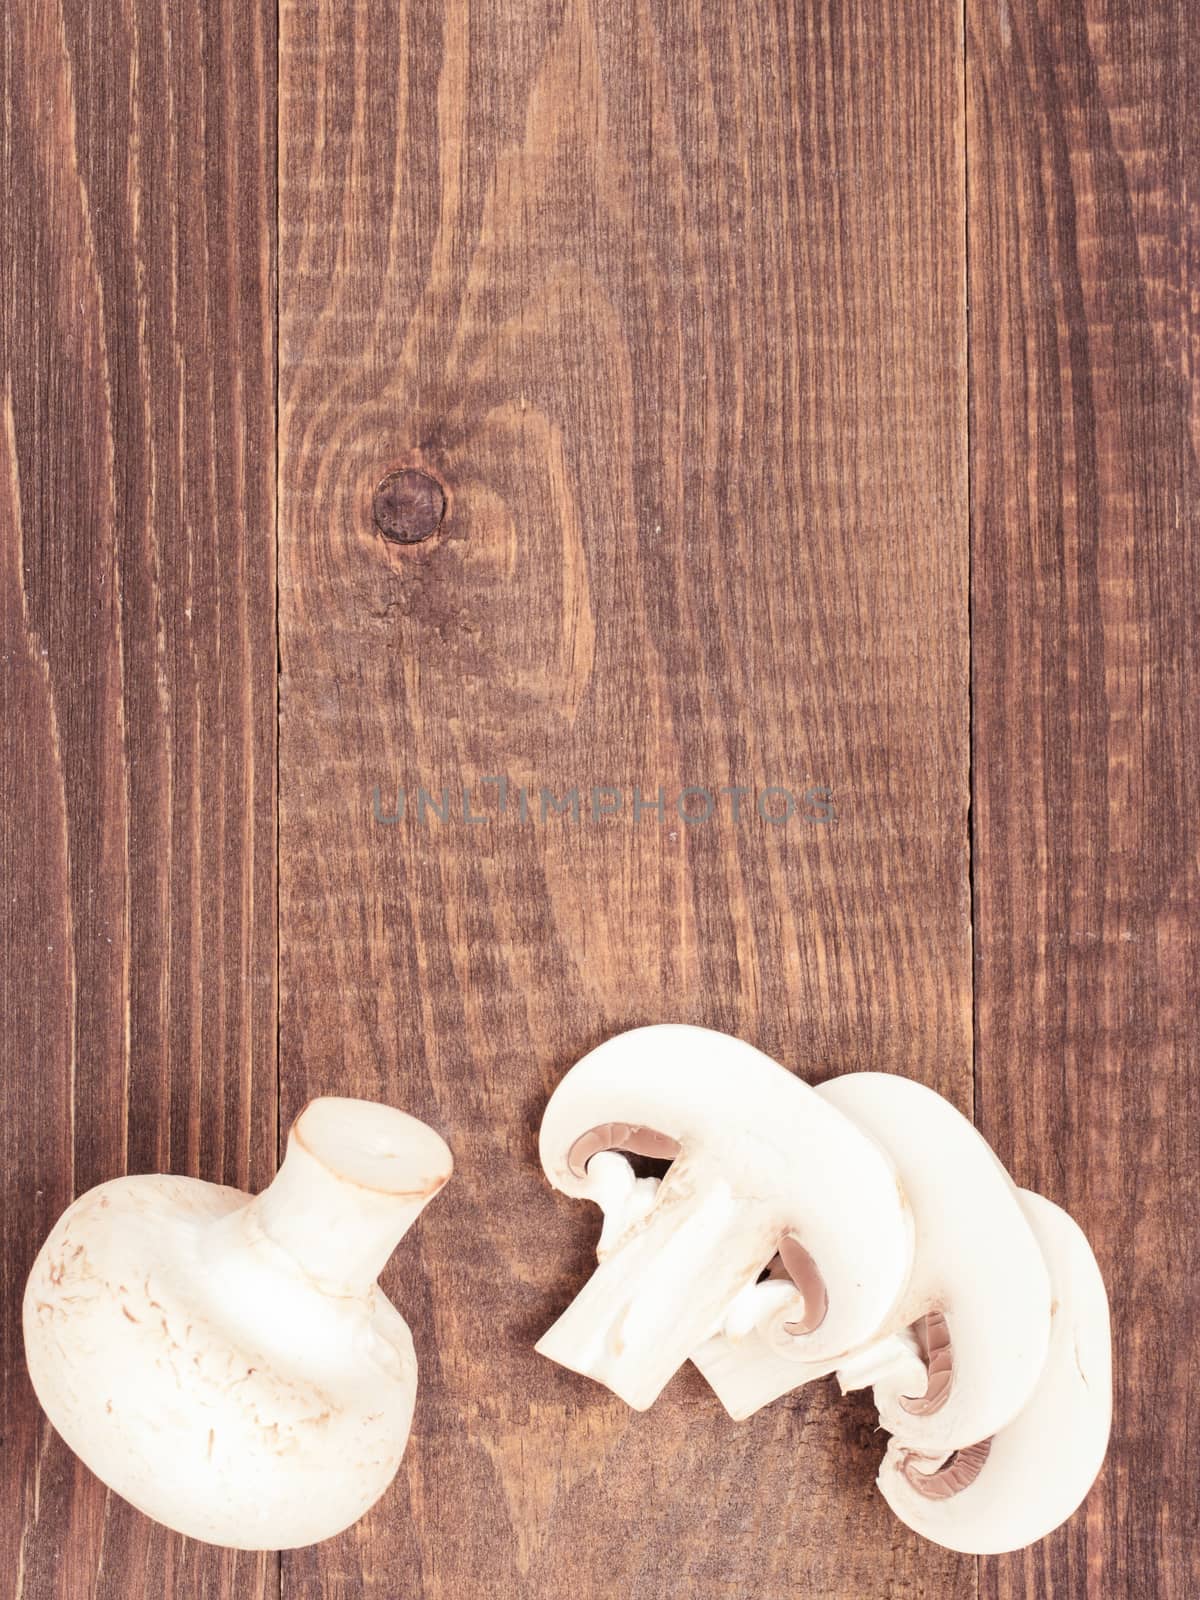 Fresh white champignon mushrooms close up on wooden background by fascinadora